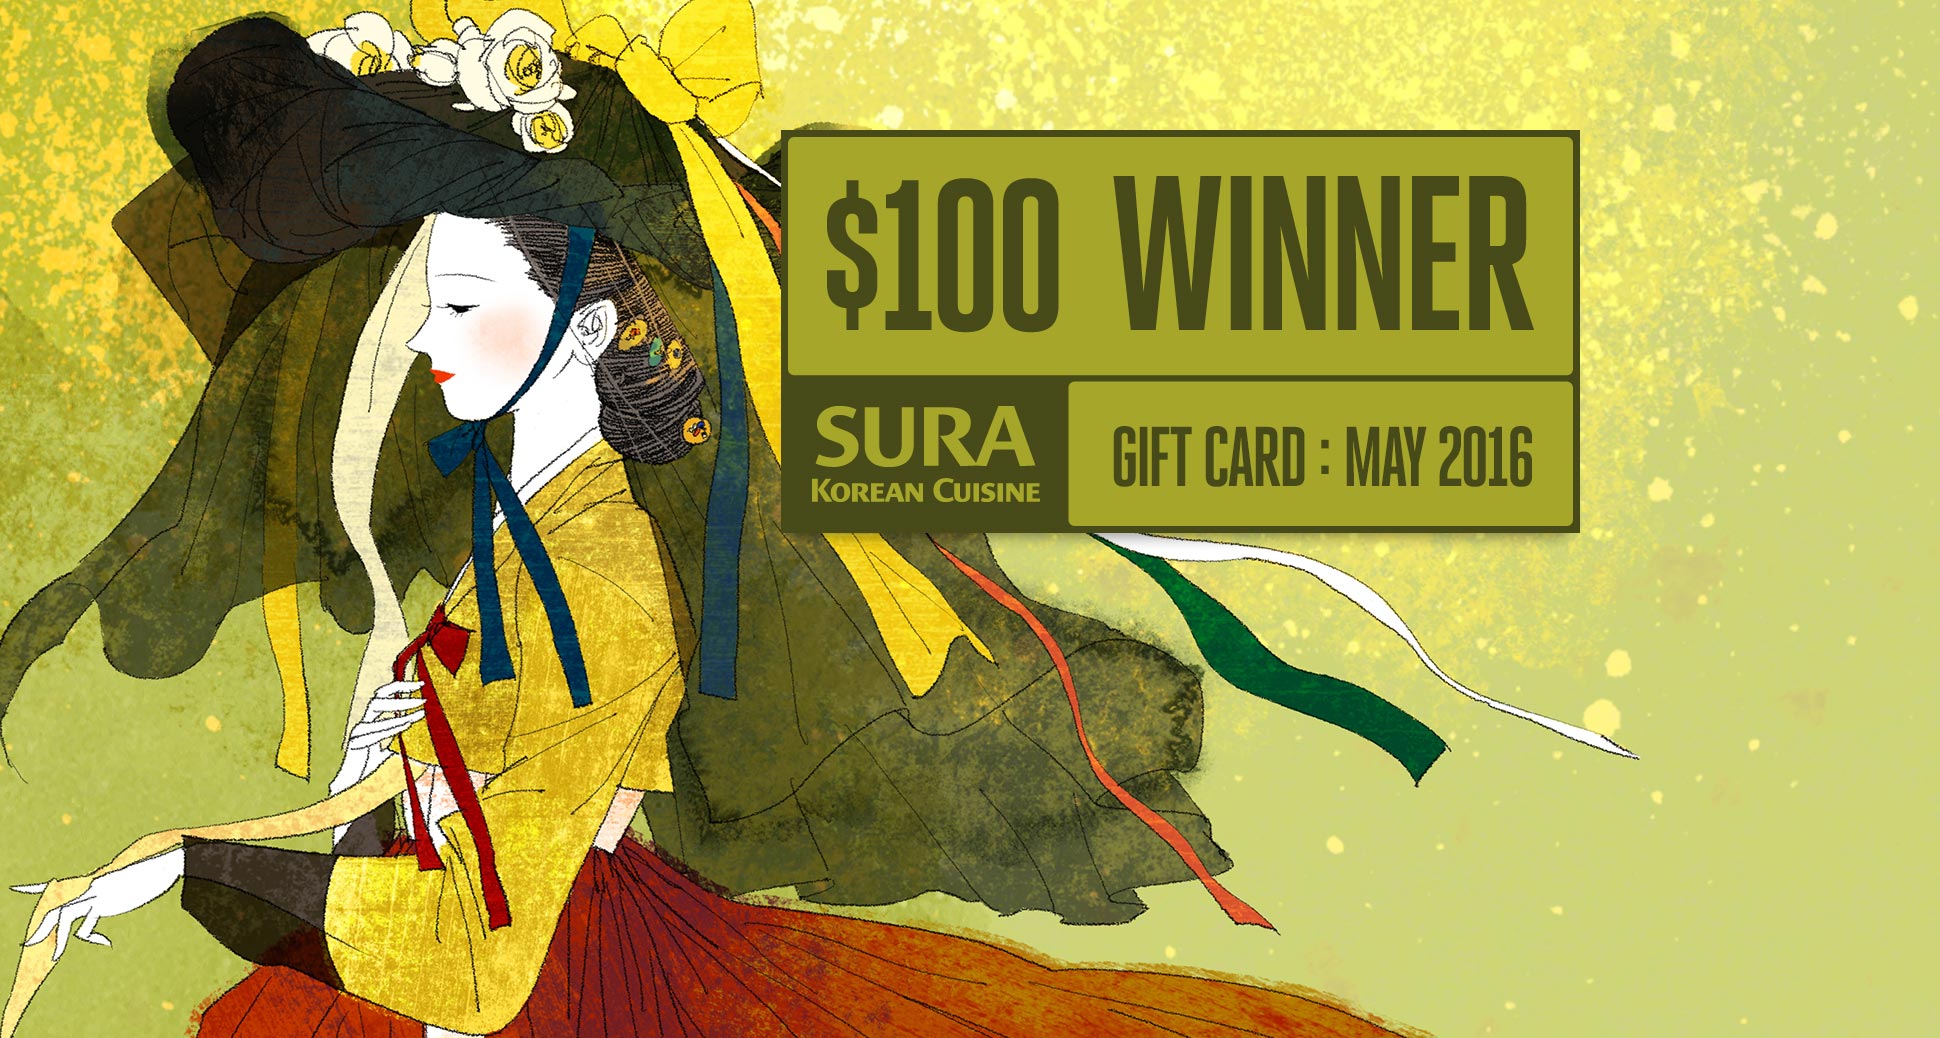 The winner of our may-2016 monthly draw for a $100 gift card is Lan Phuong!